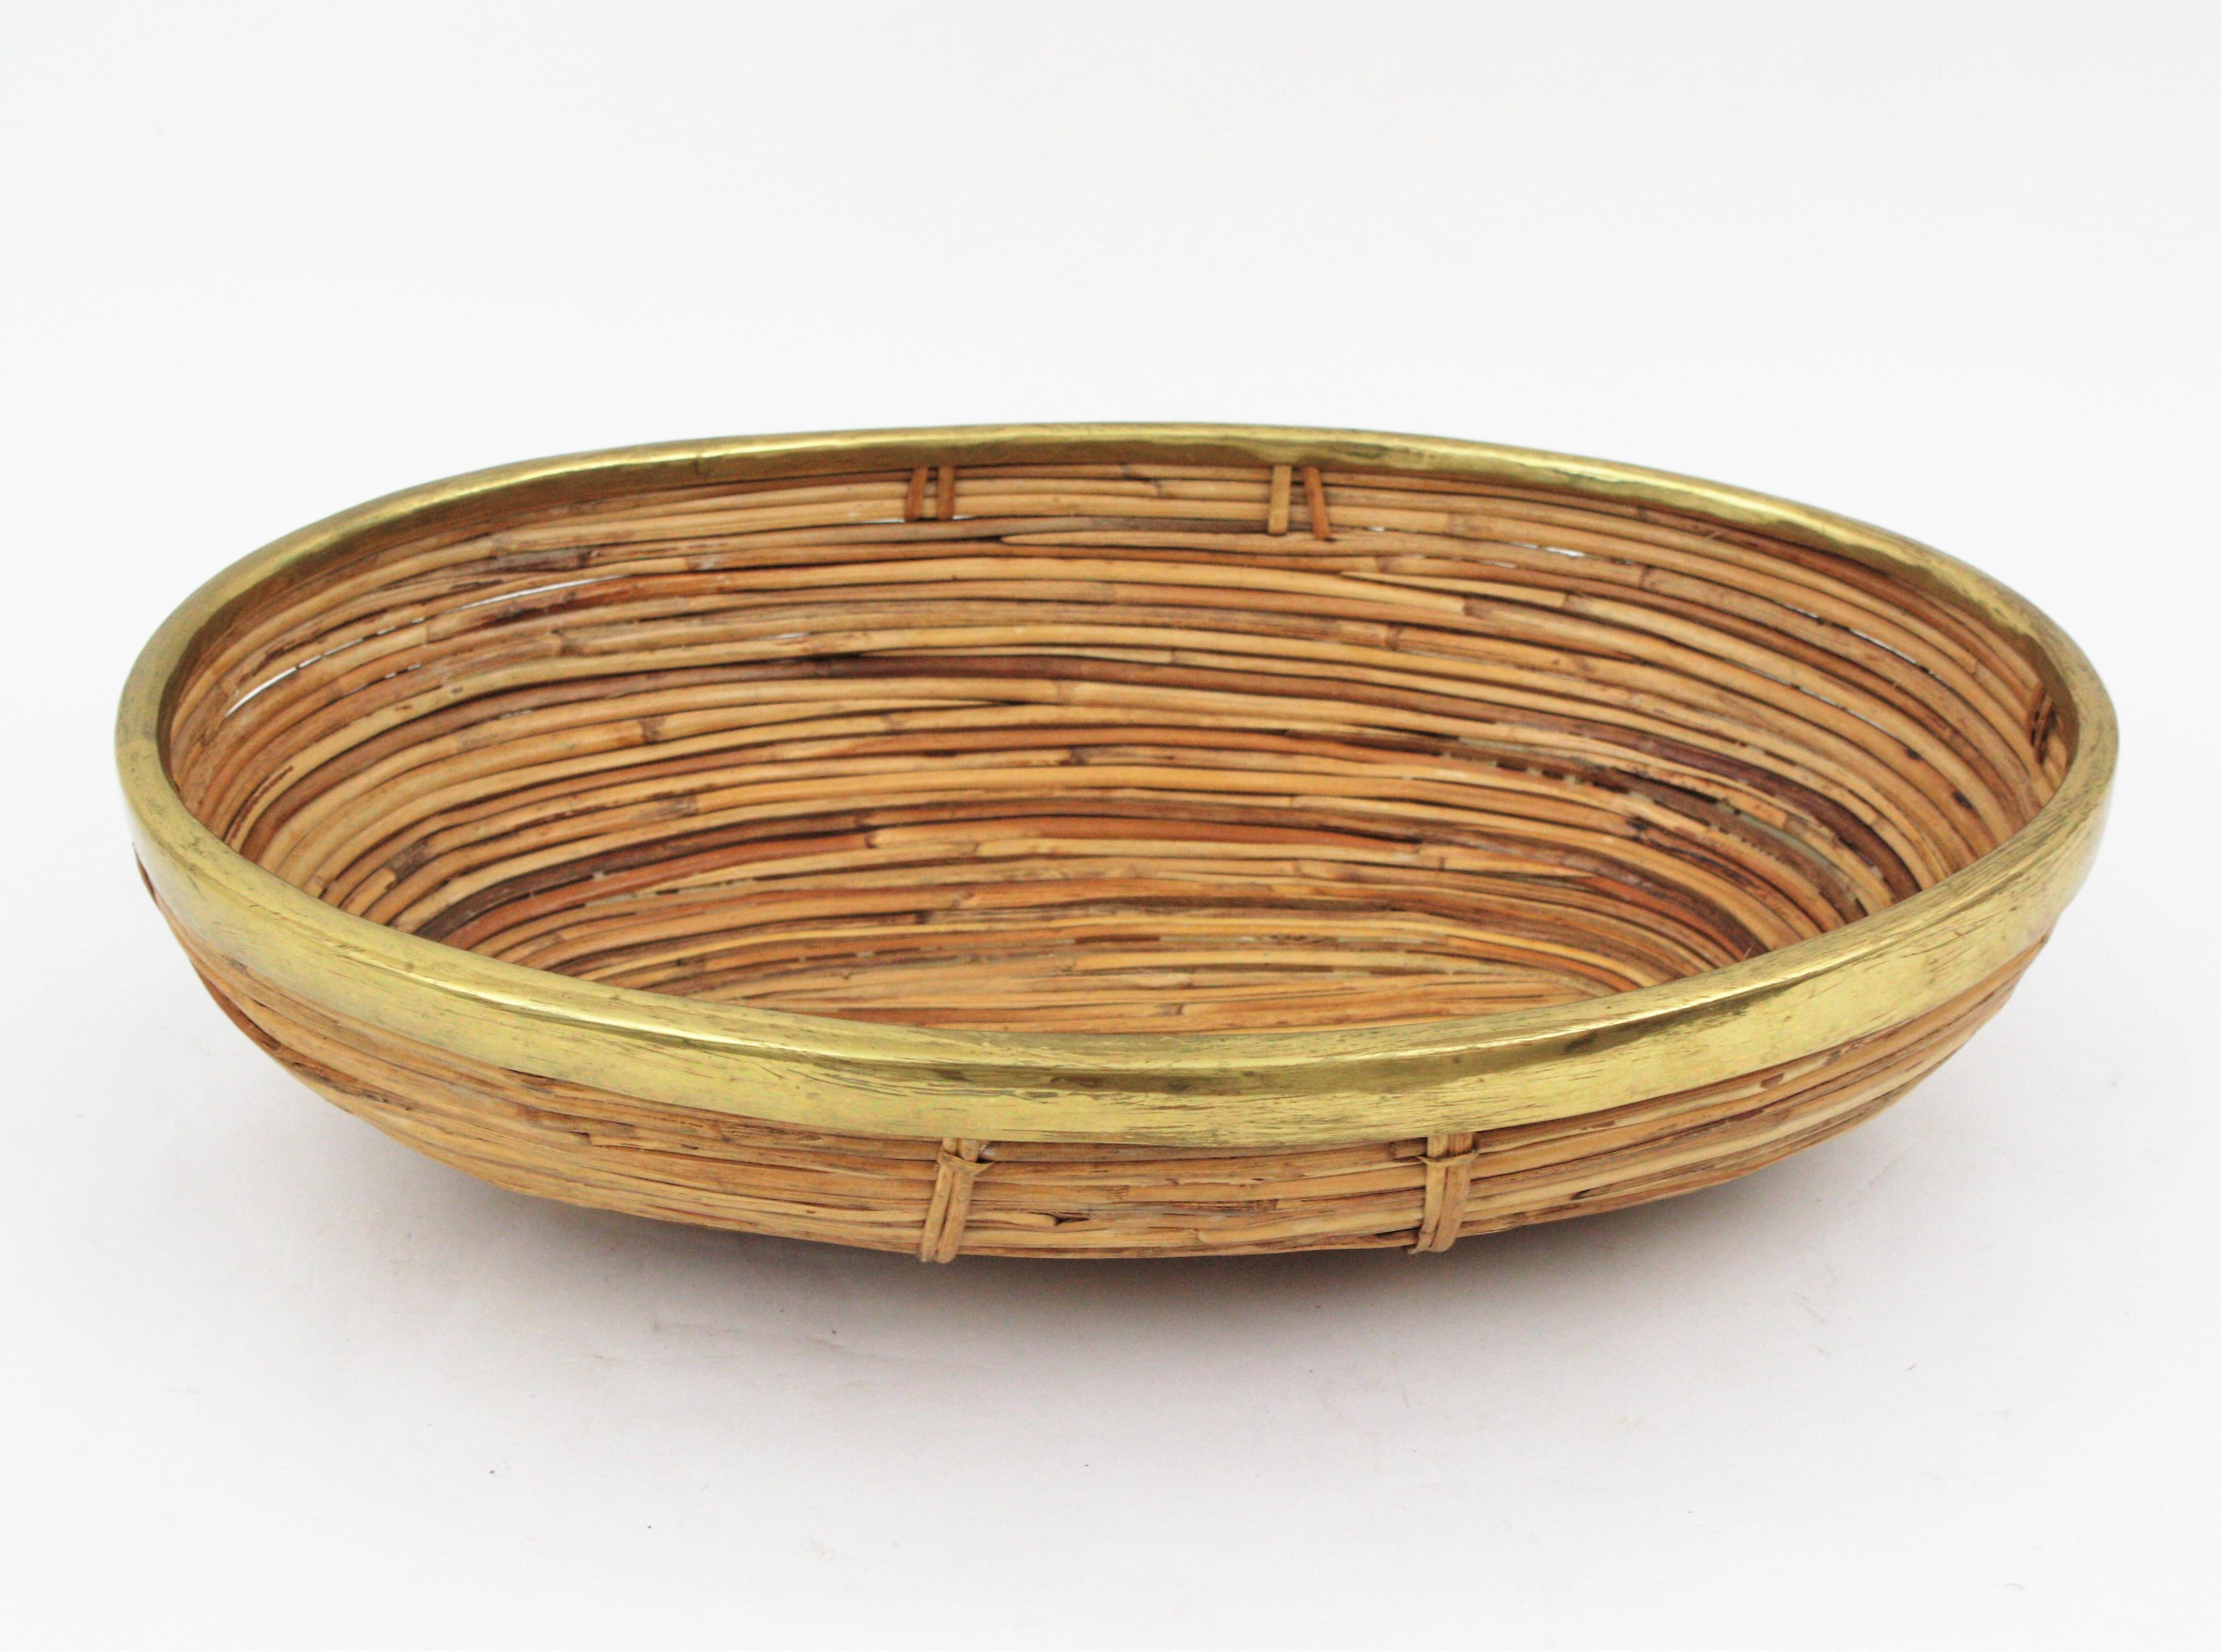 Rattan and Brass Italian Large Oval Basket Centerpiece Bowl, 1970s For Sale 5